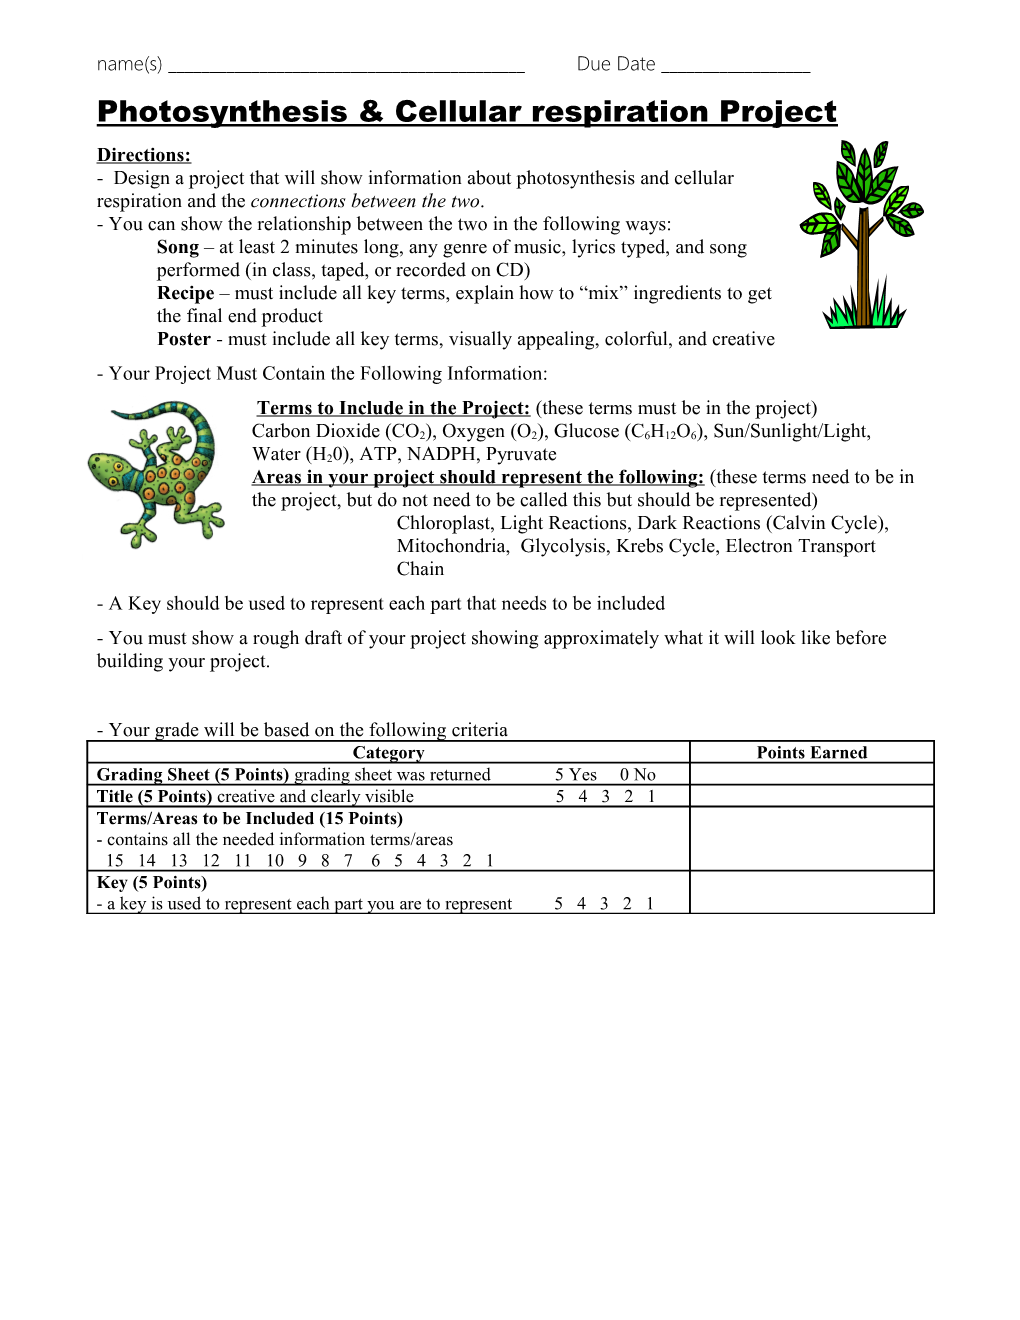 Photosynthesis and Cellular Respiration Poster Project s1